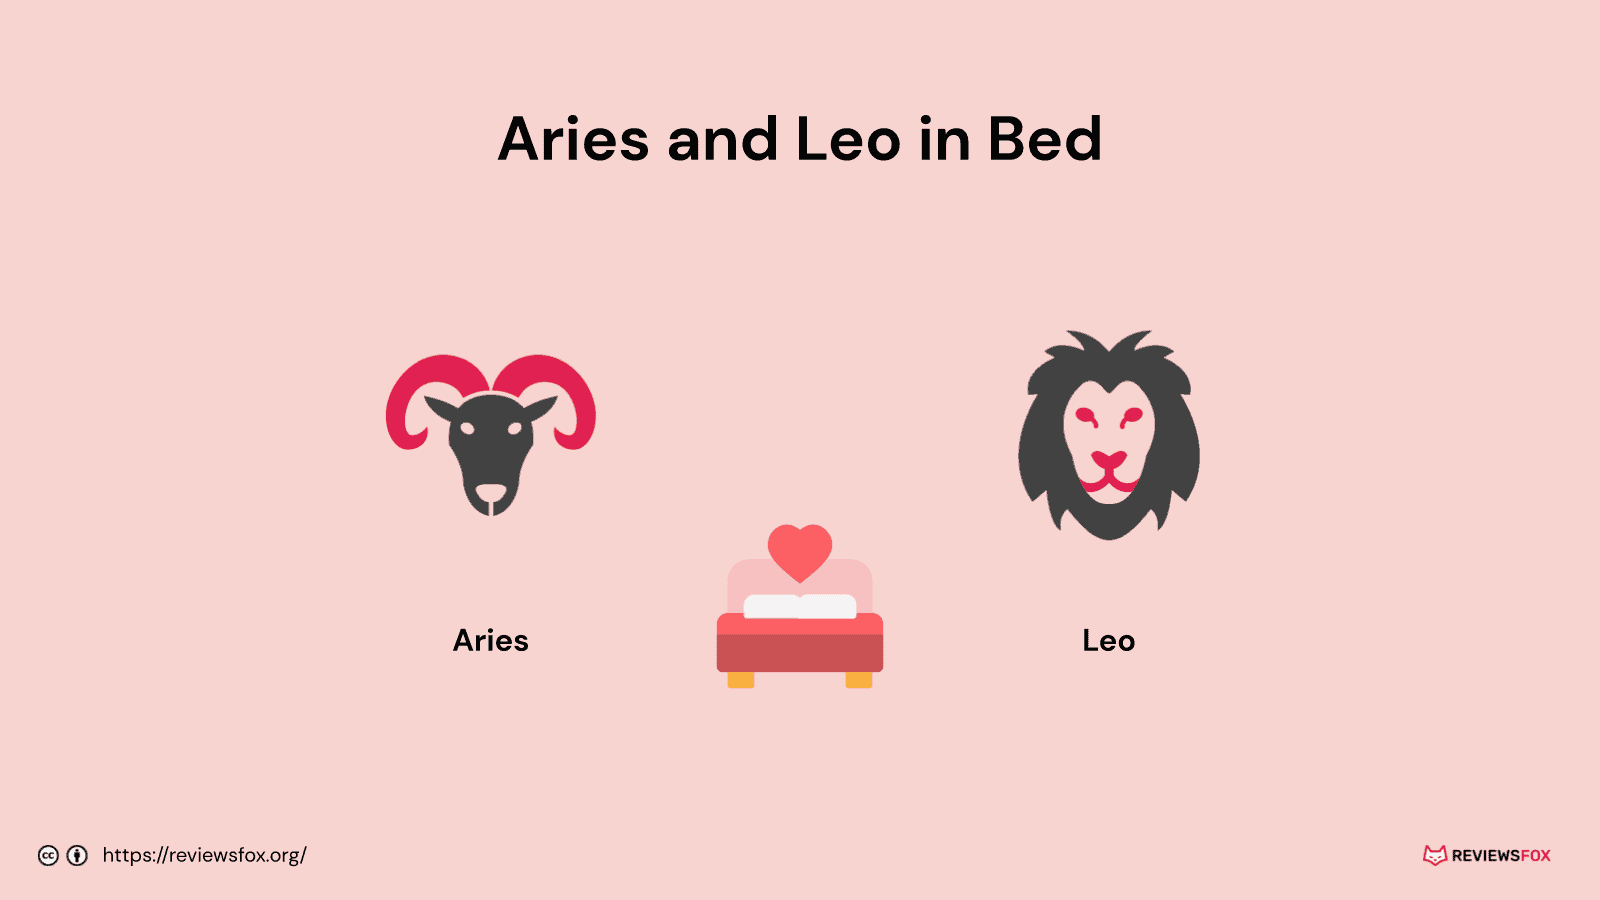 Aries and Leo in bed